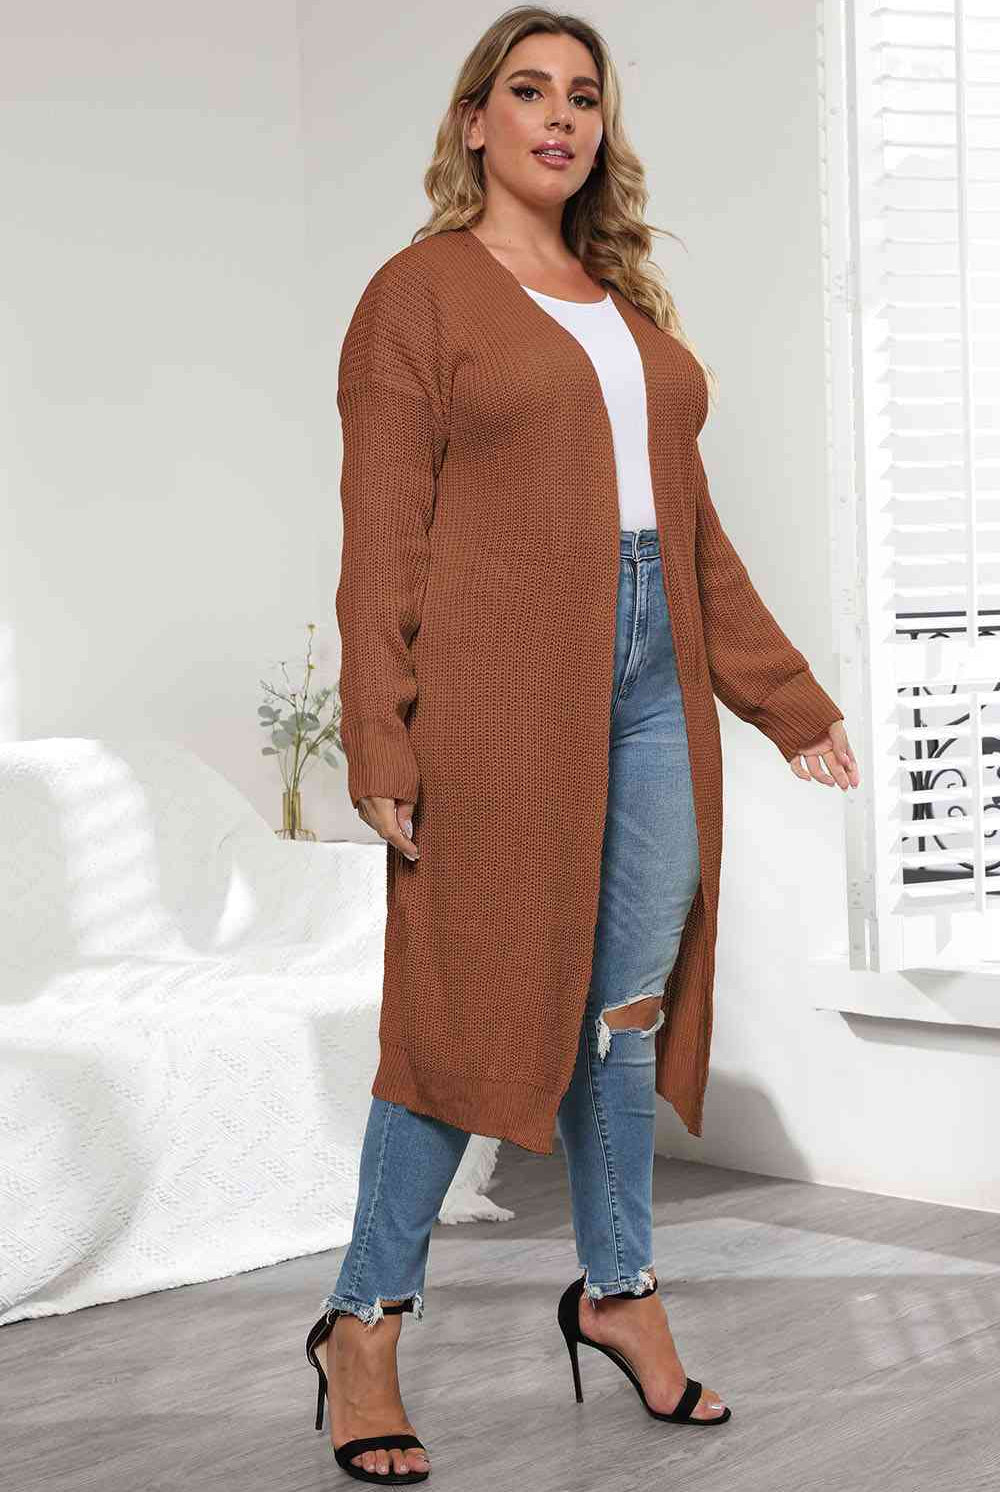 Light Gray Plus Size Open Front Long Sleeve Cardigan Plus Size Clothes